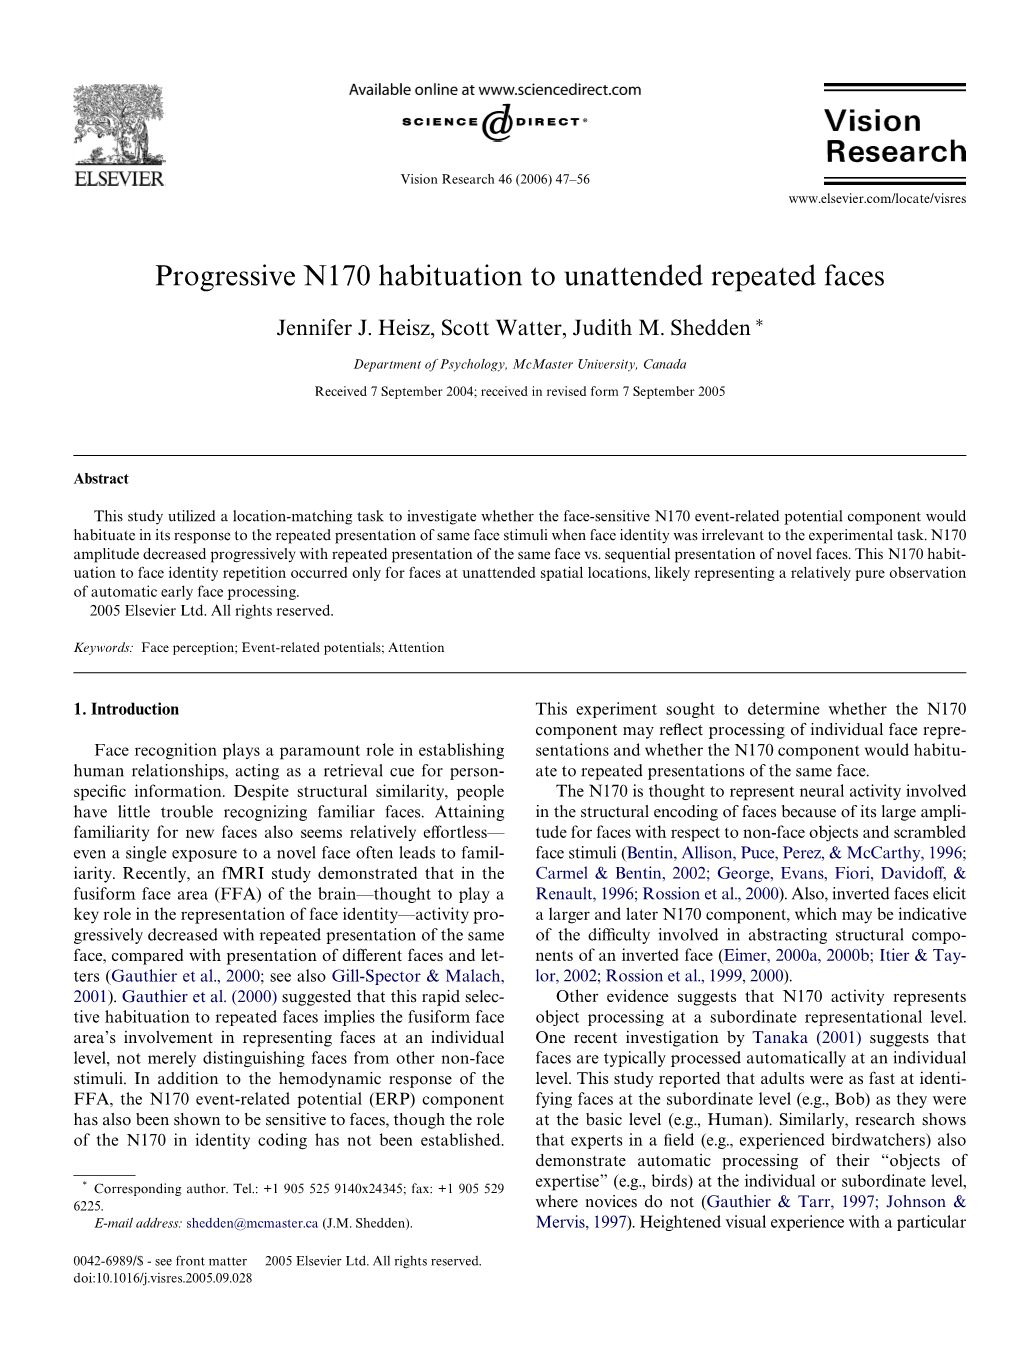 Progressive N170 Habituation to Unattended Repeated Faces